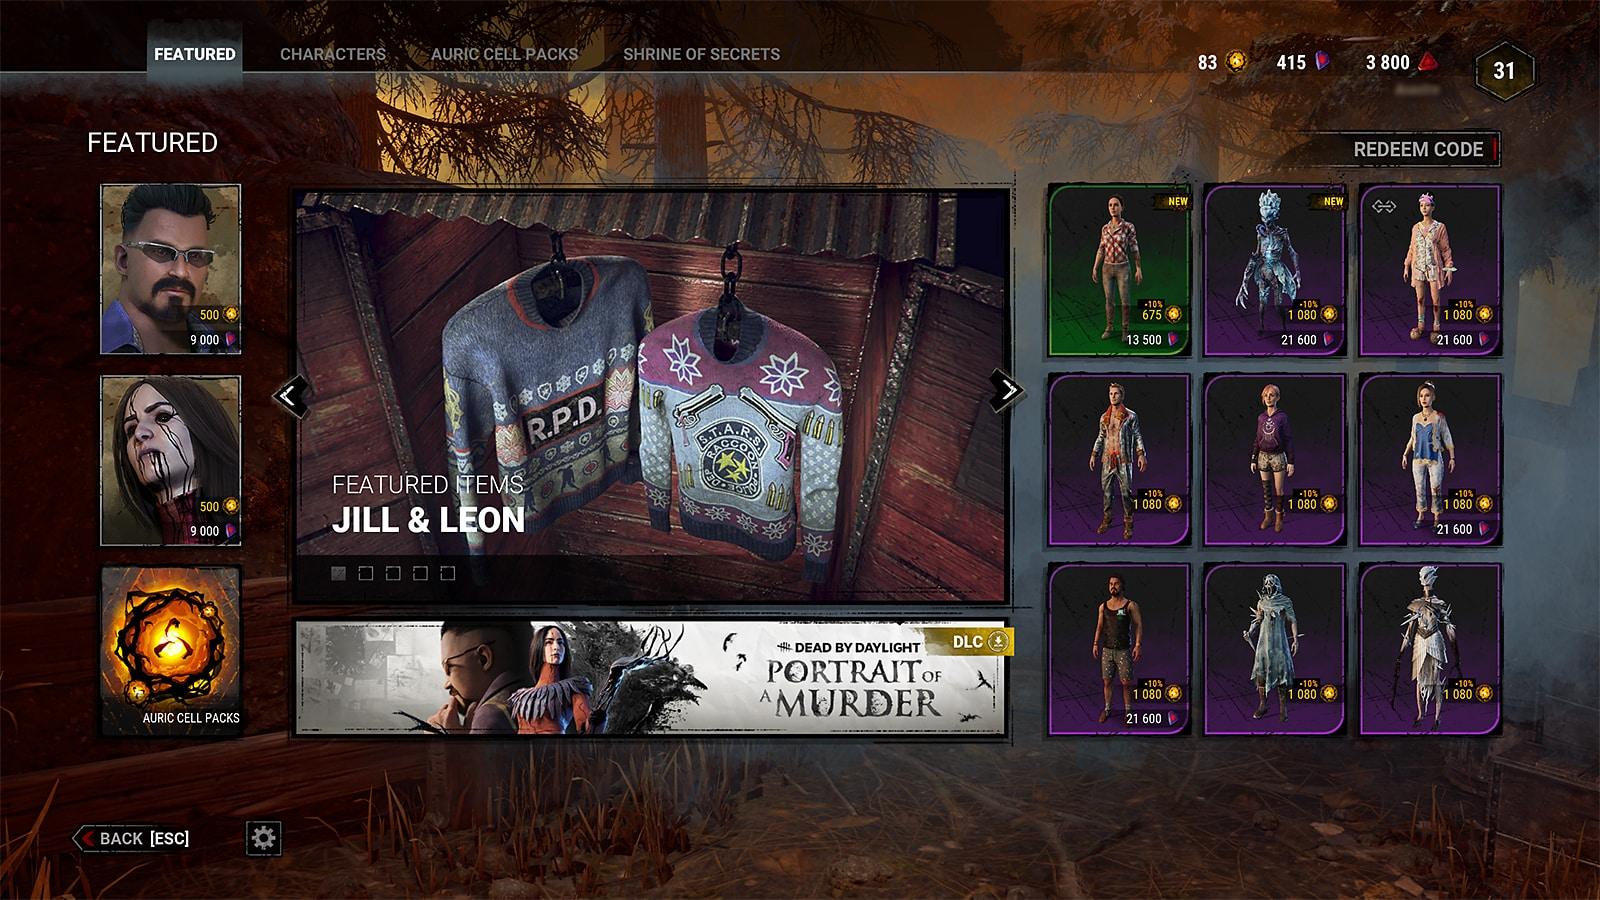 An image of the store showing the Redeem Code button to claim Prime Gaming DBD rewards